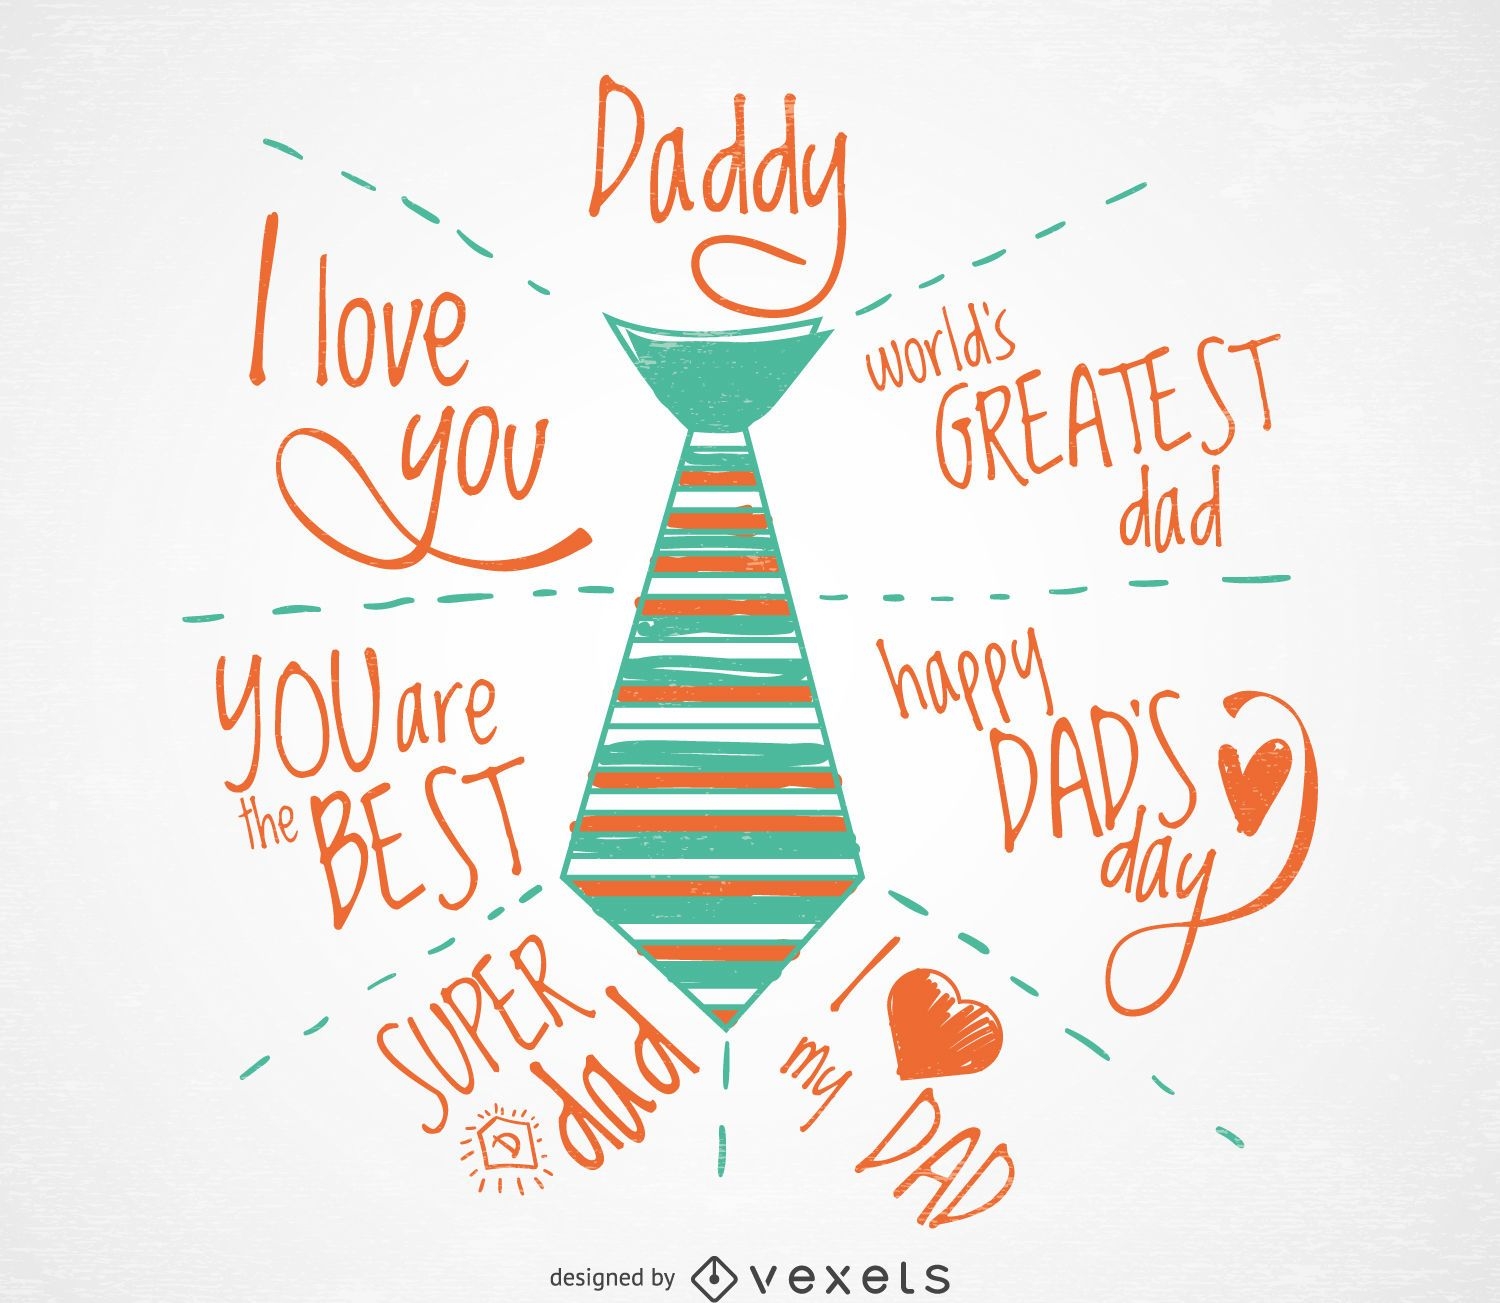 Father's Day greeting card